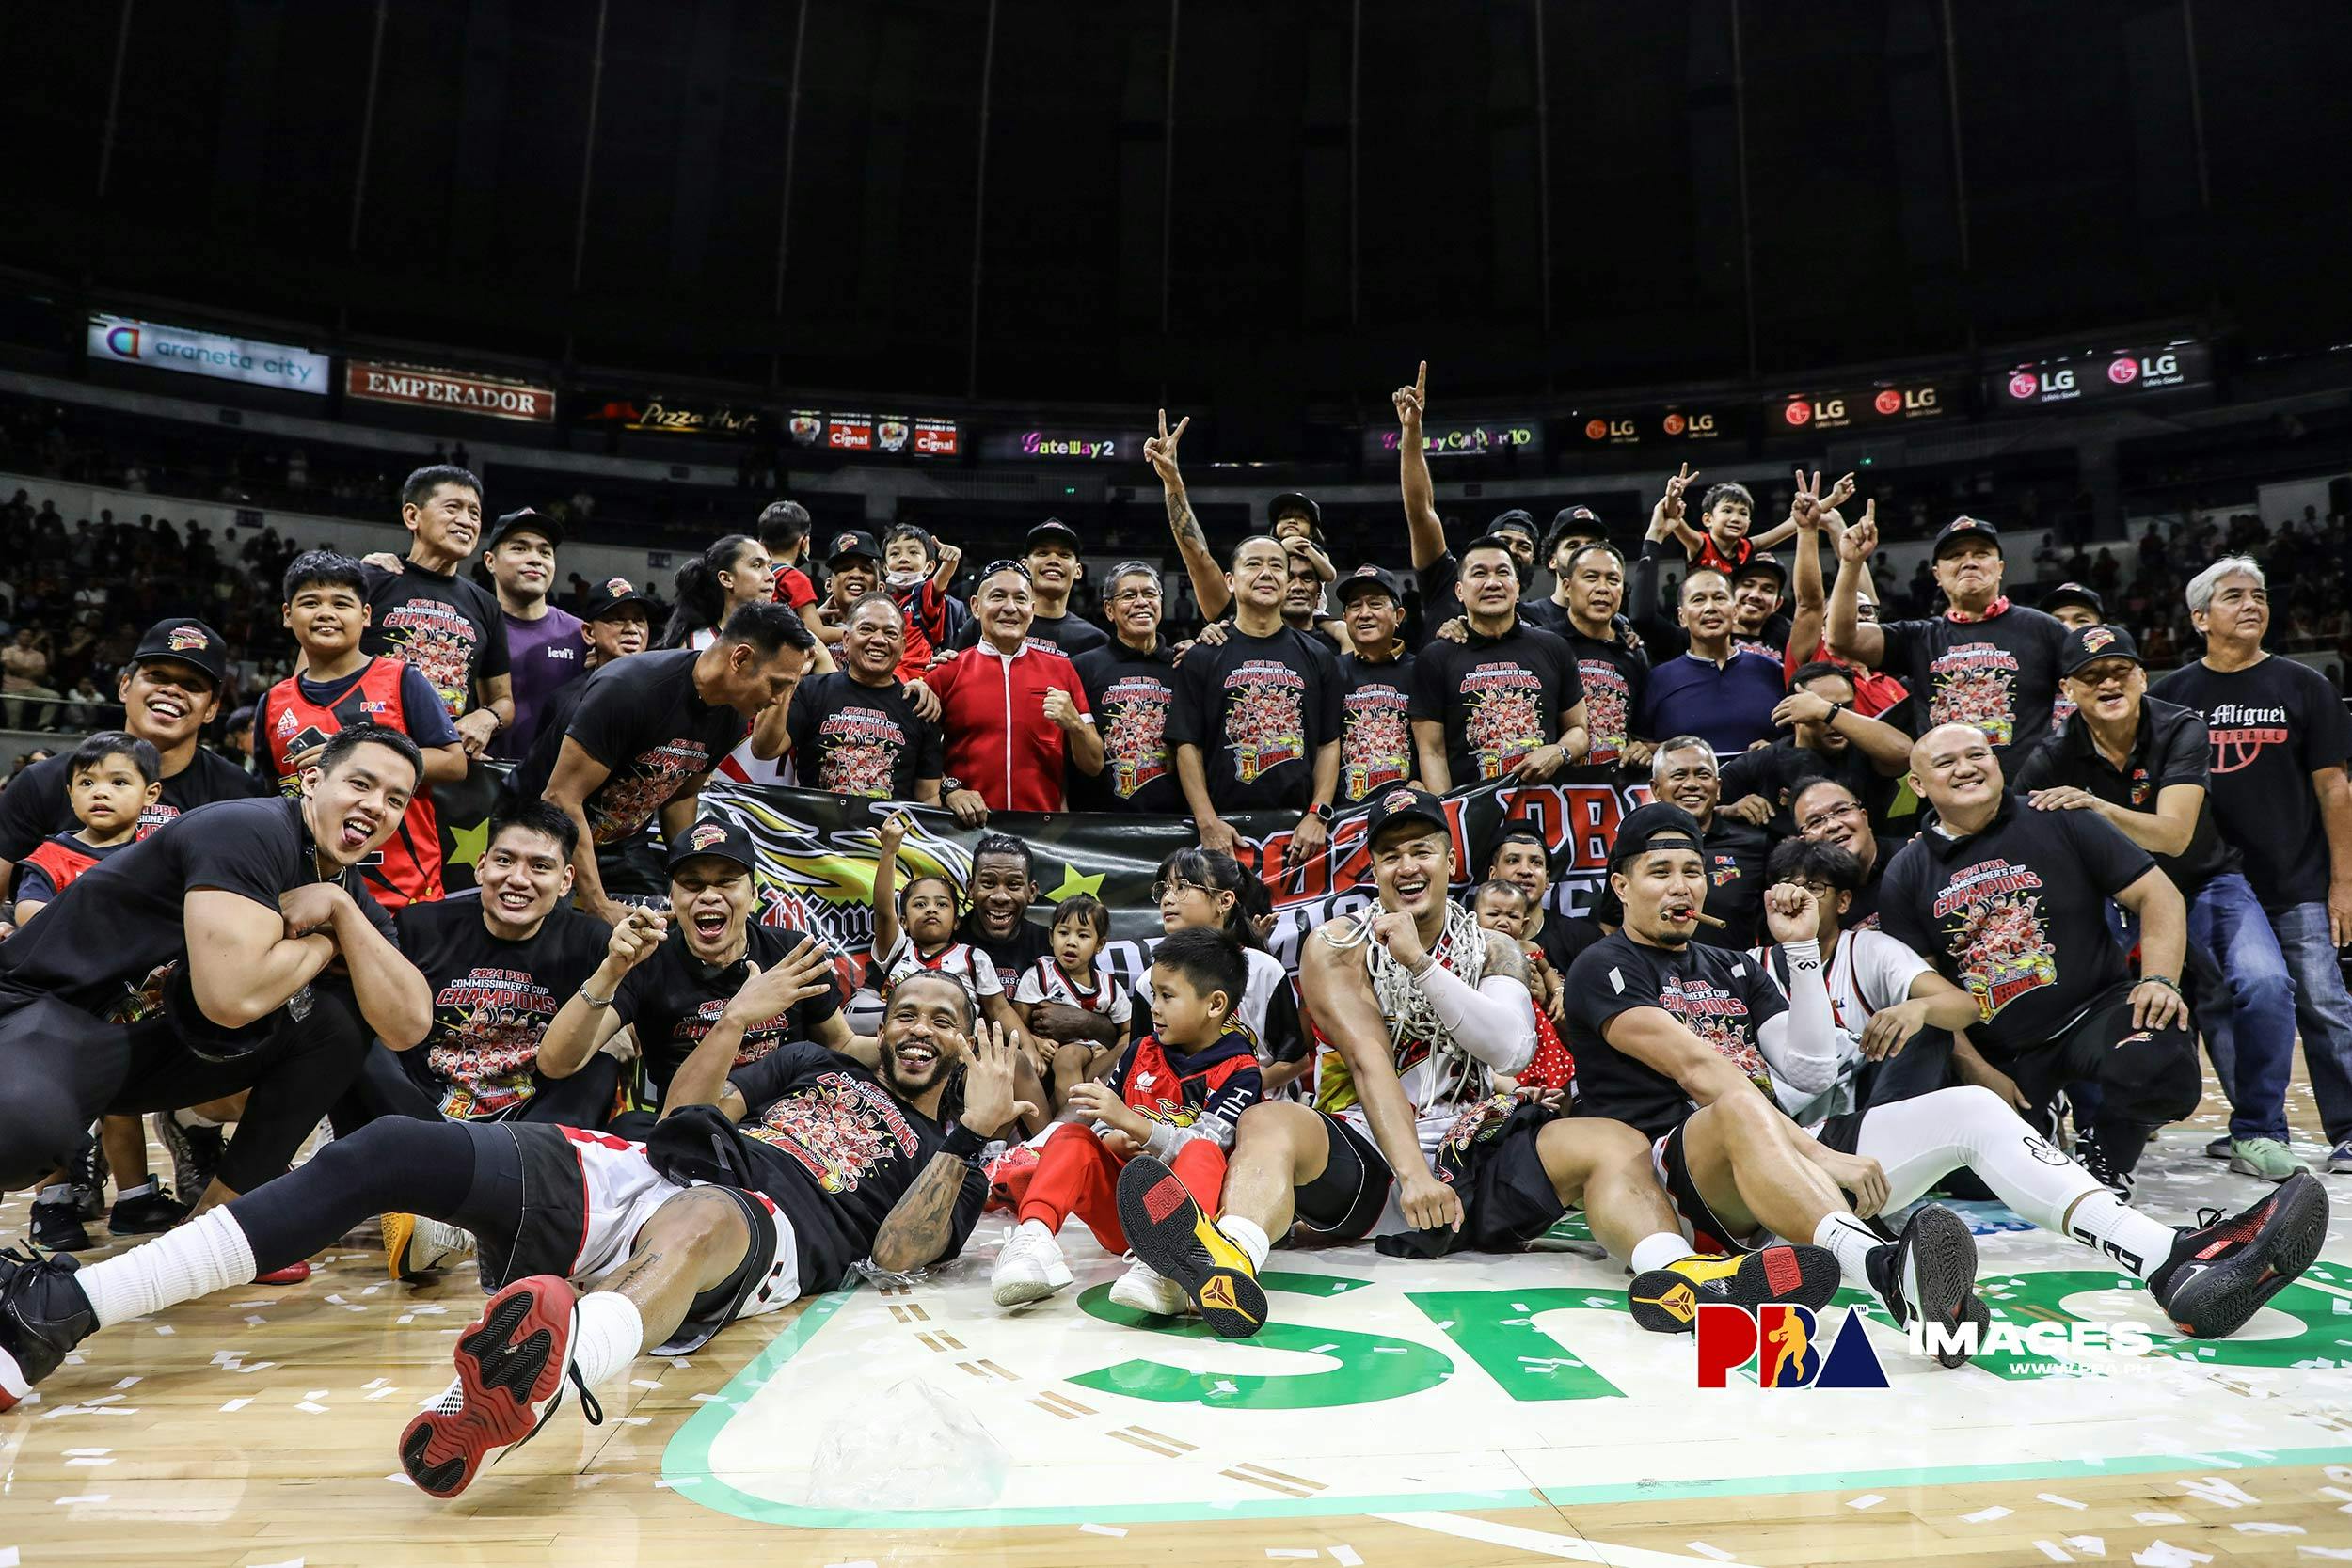 PBA: Full schedule released for Philippine Cup starting February 28